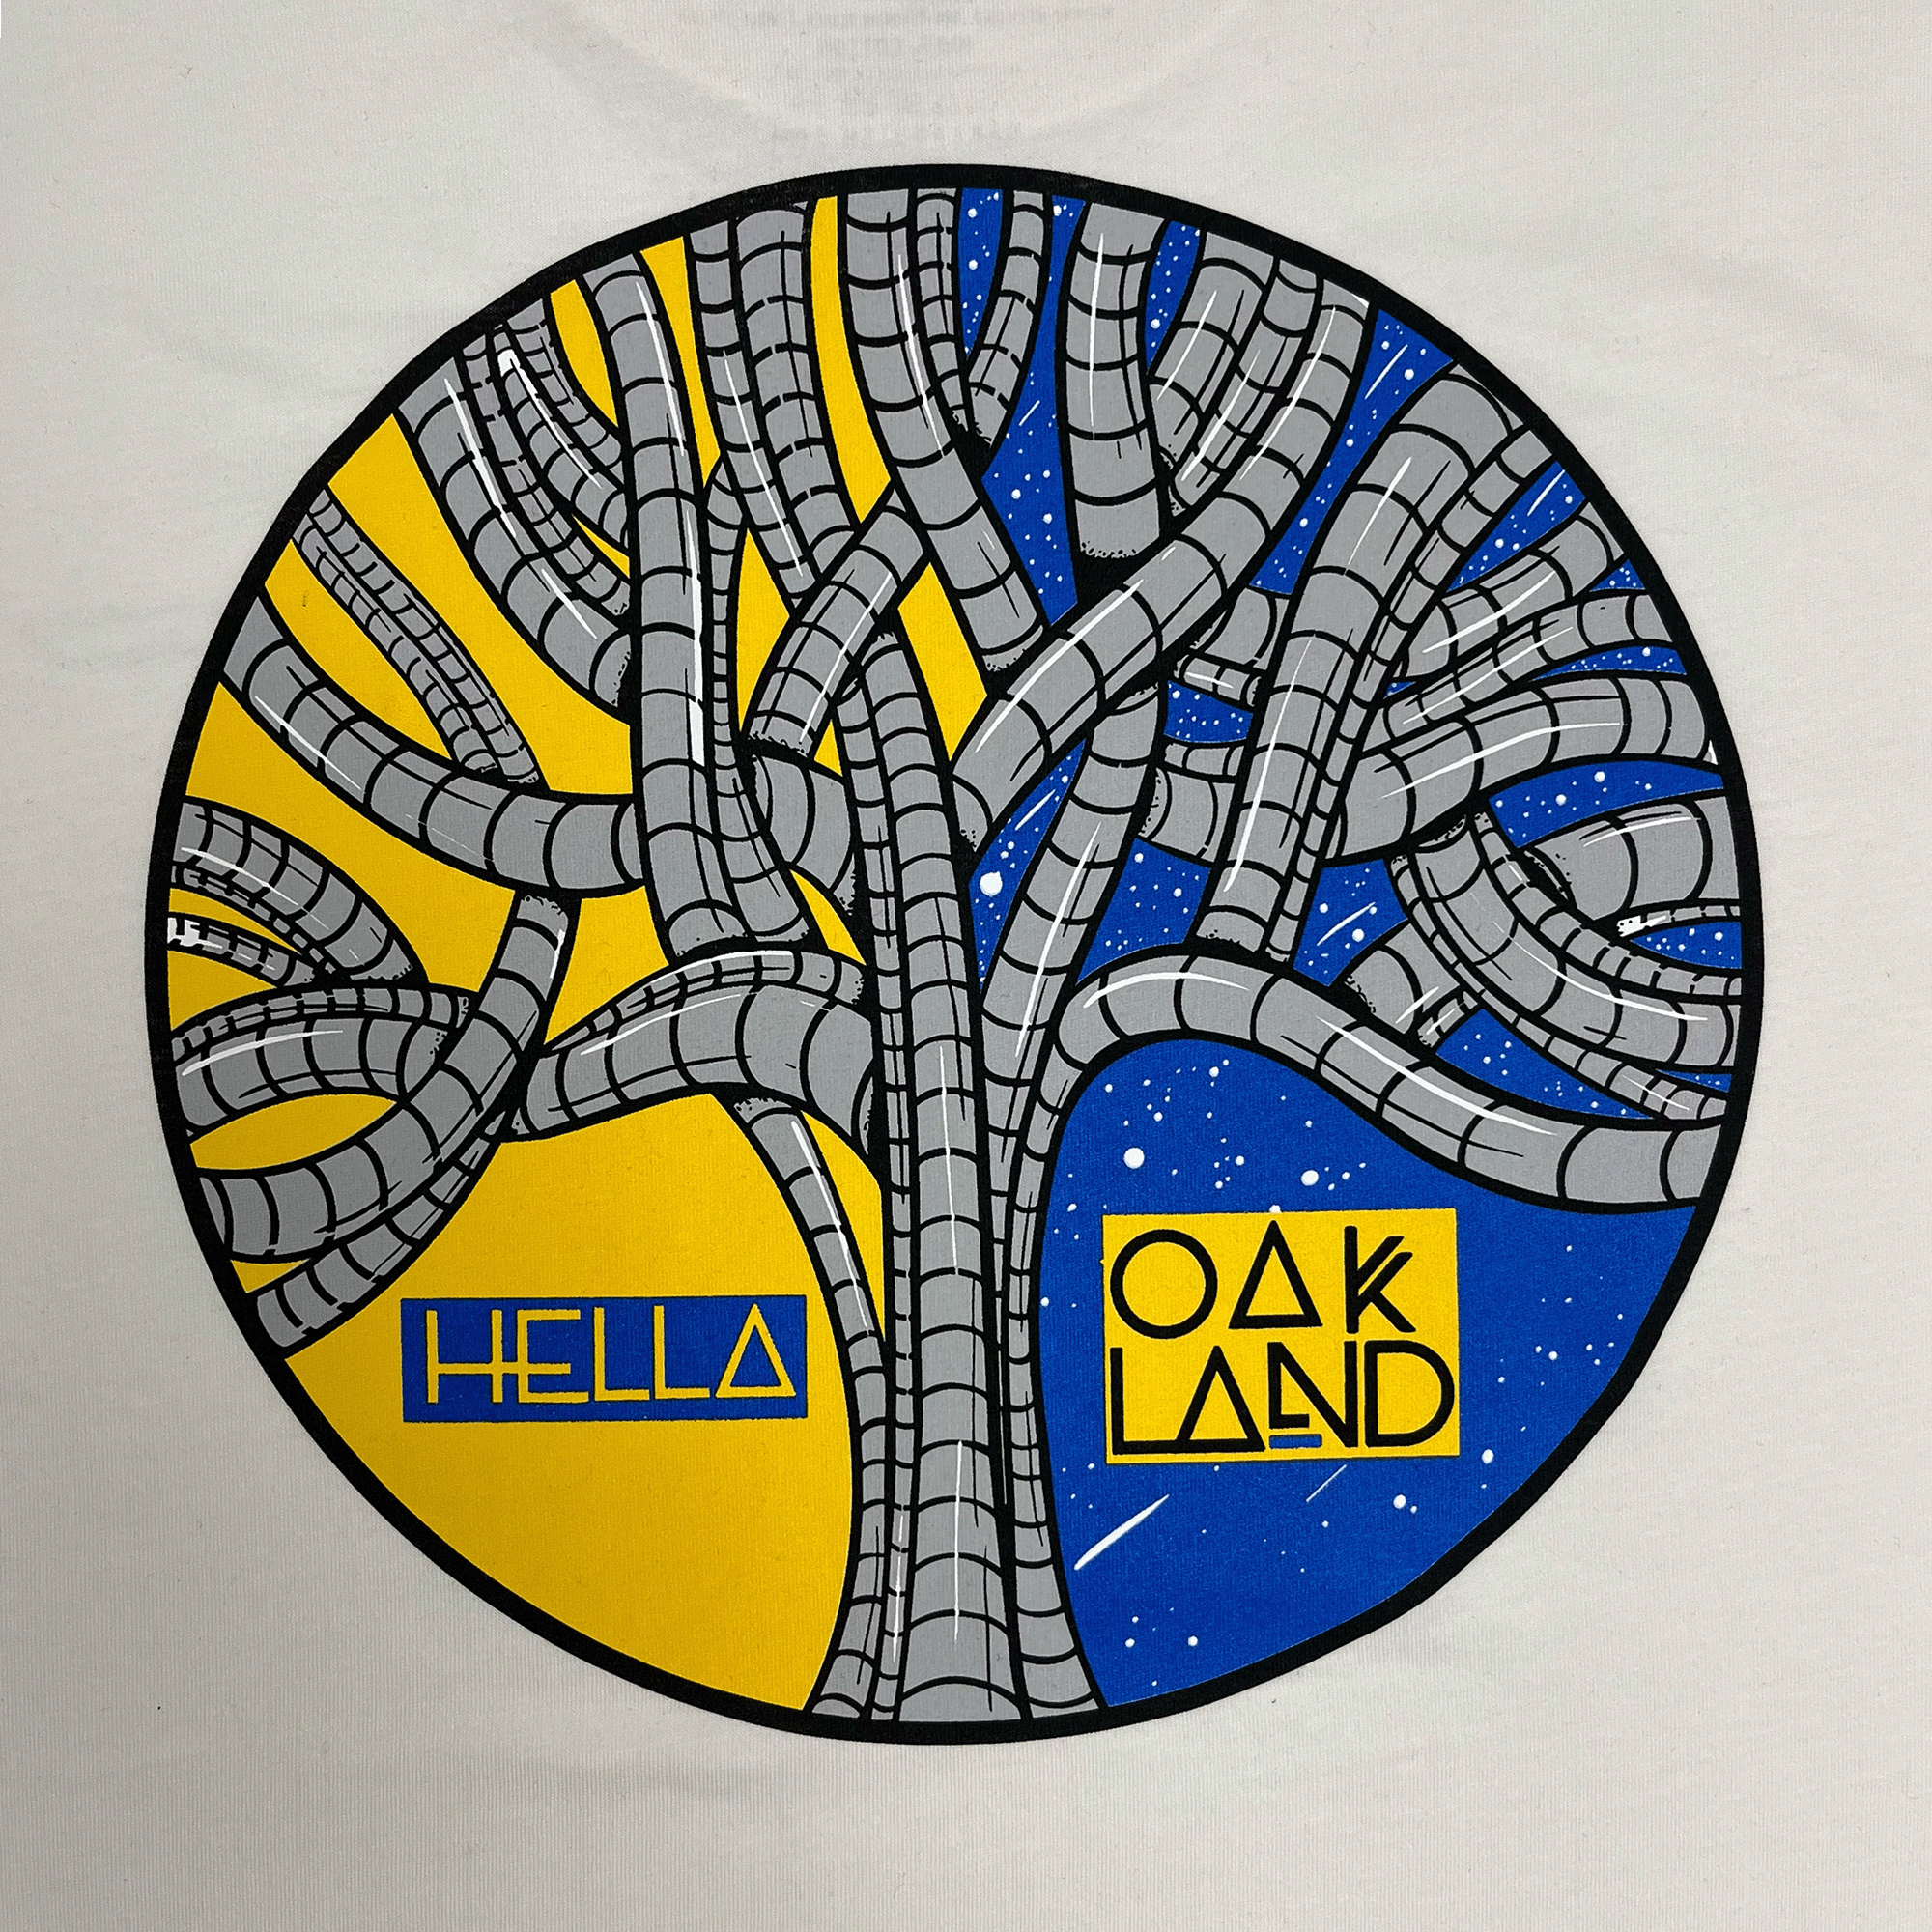 Close up of graphic art designed by Oakland artist HellaFutures and HELLA OAKLAND wordmark on the backside of a natural cotton colored t-shirt.